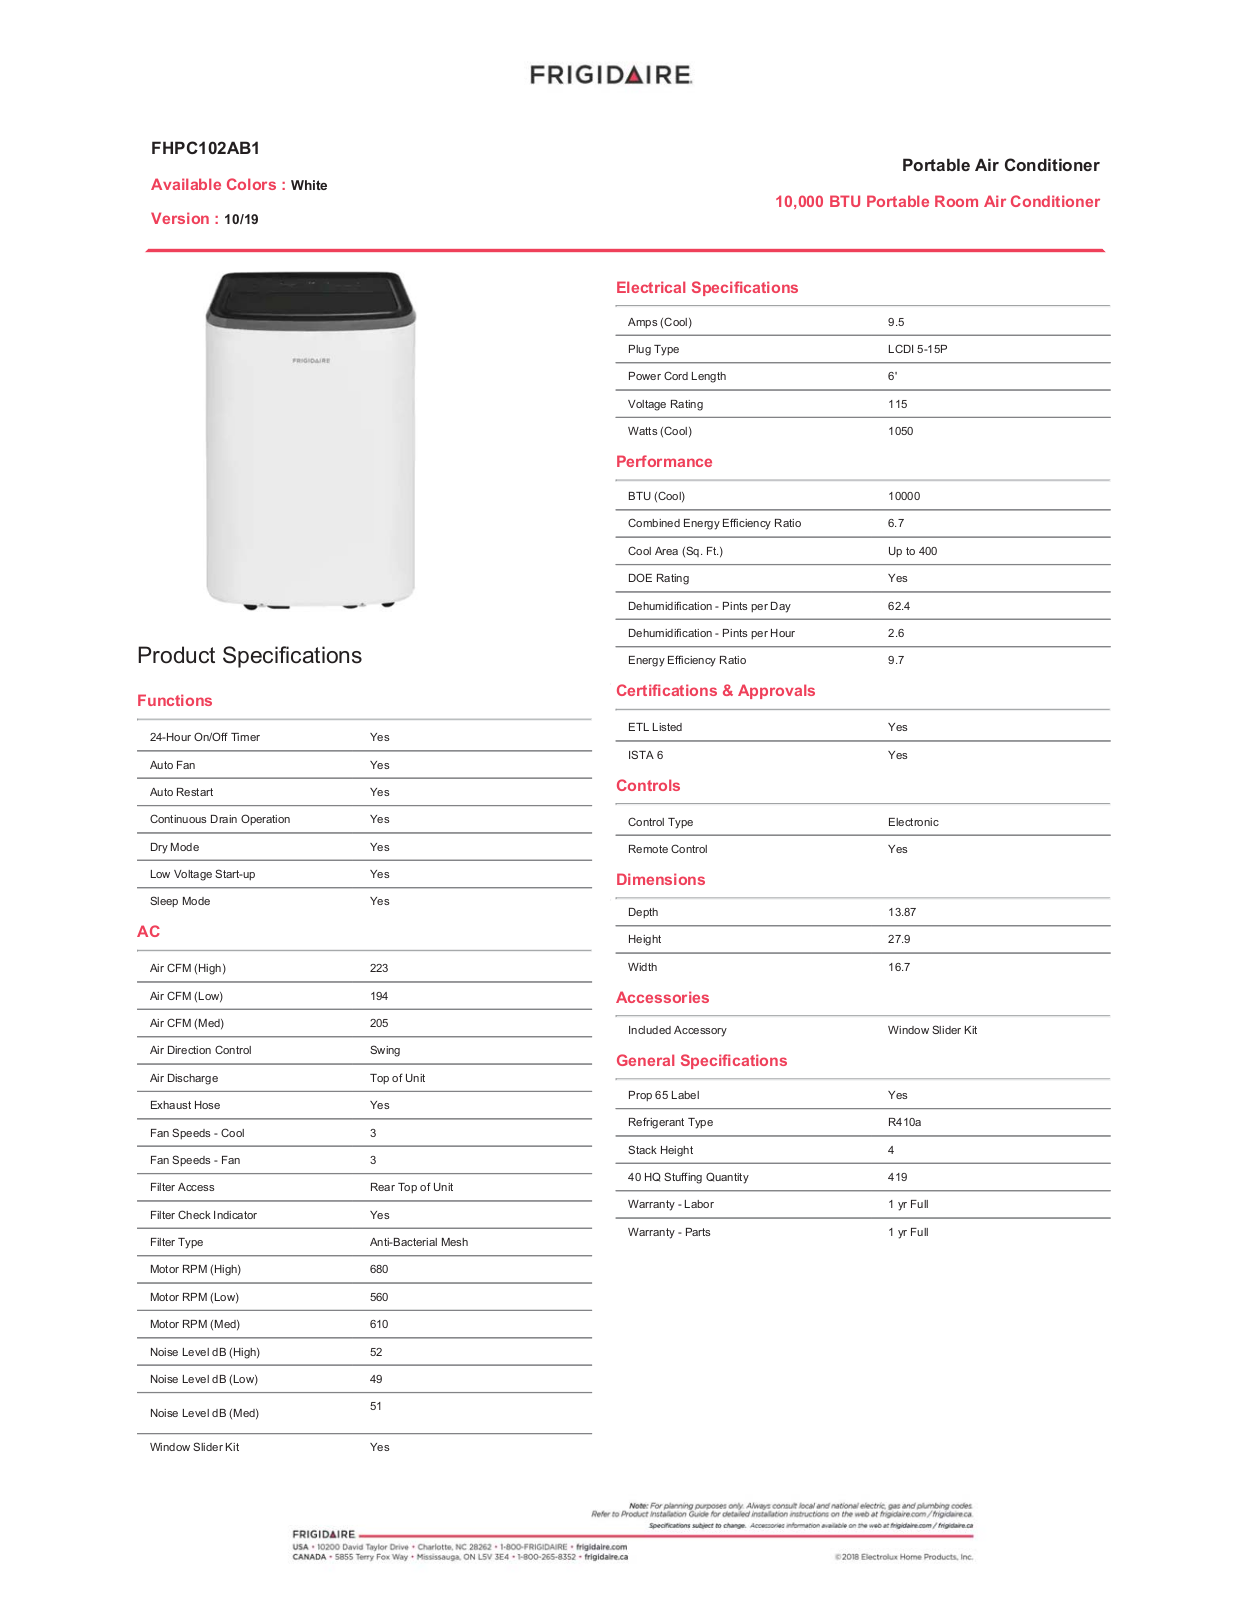 Frigidaire FHPC102AB1 Specifications